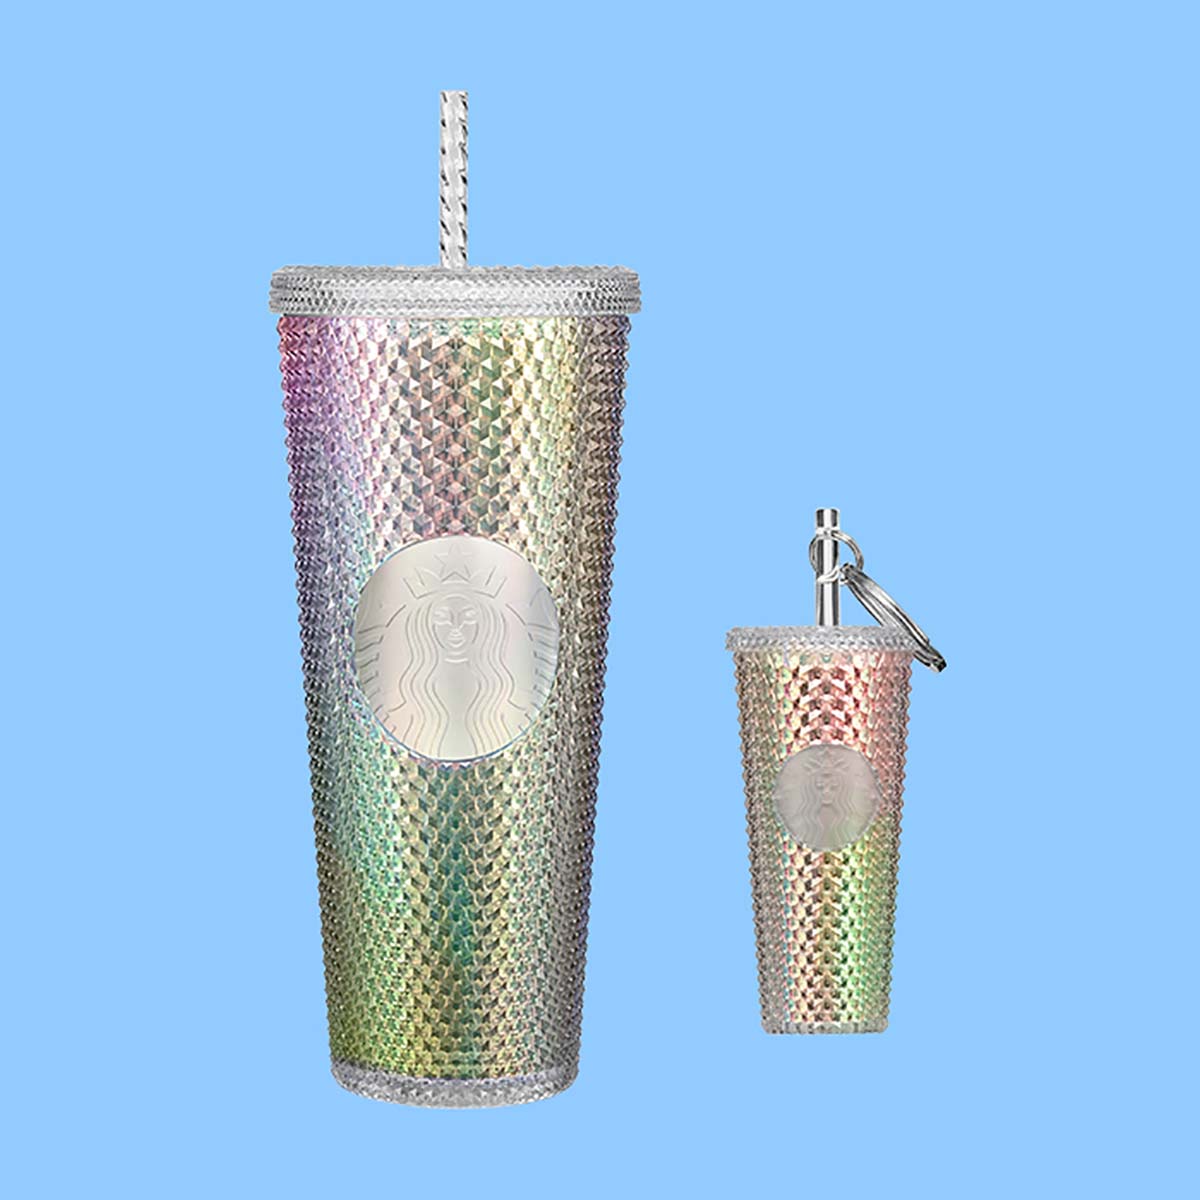 Starbucks Iridescent Bling Cold Cup (24 oz) and Keychain.